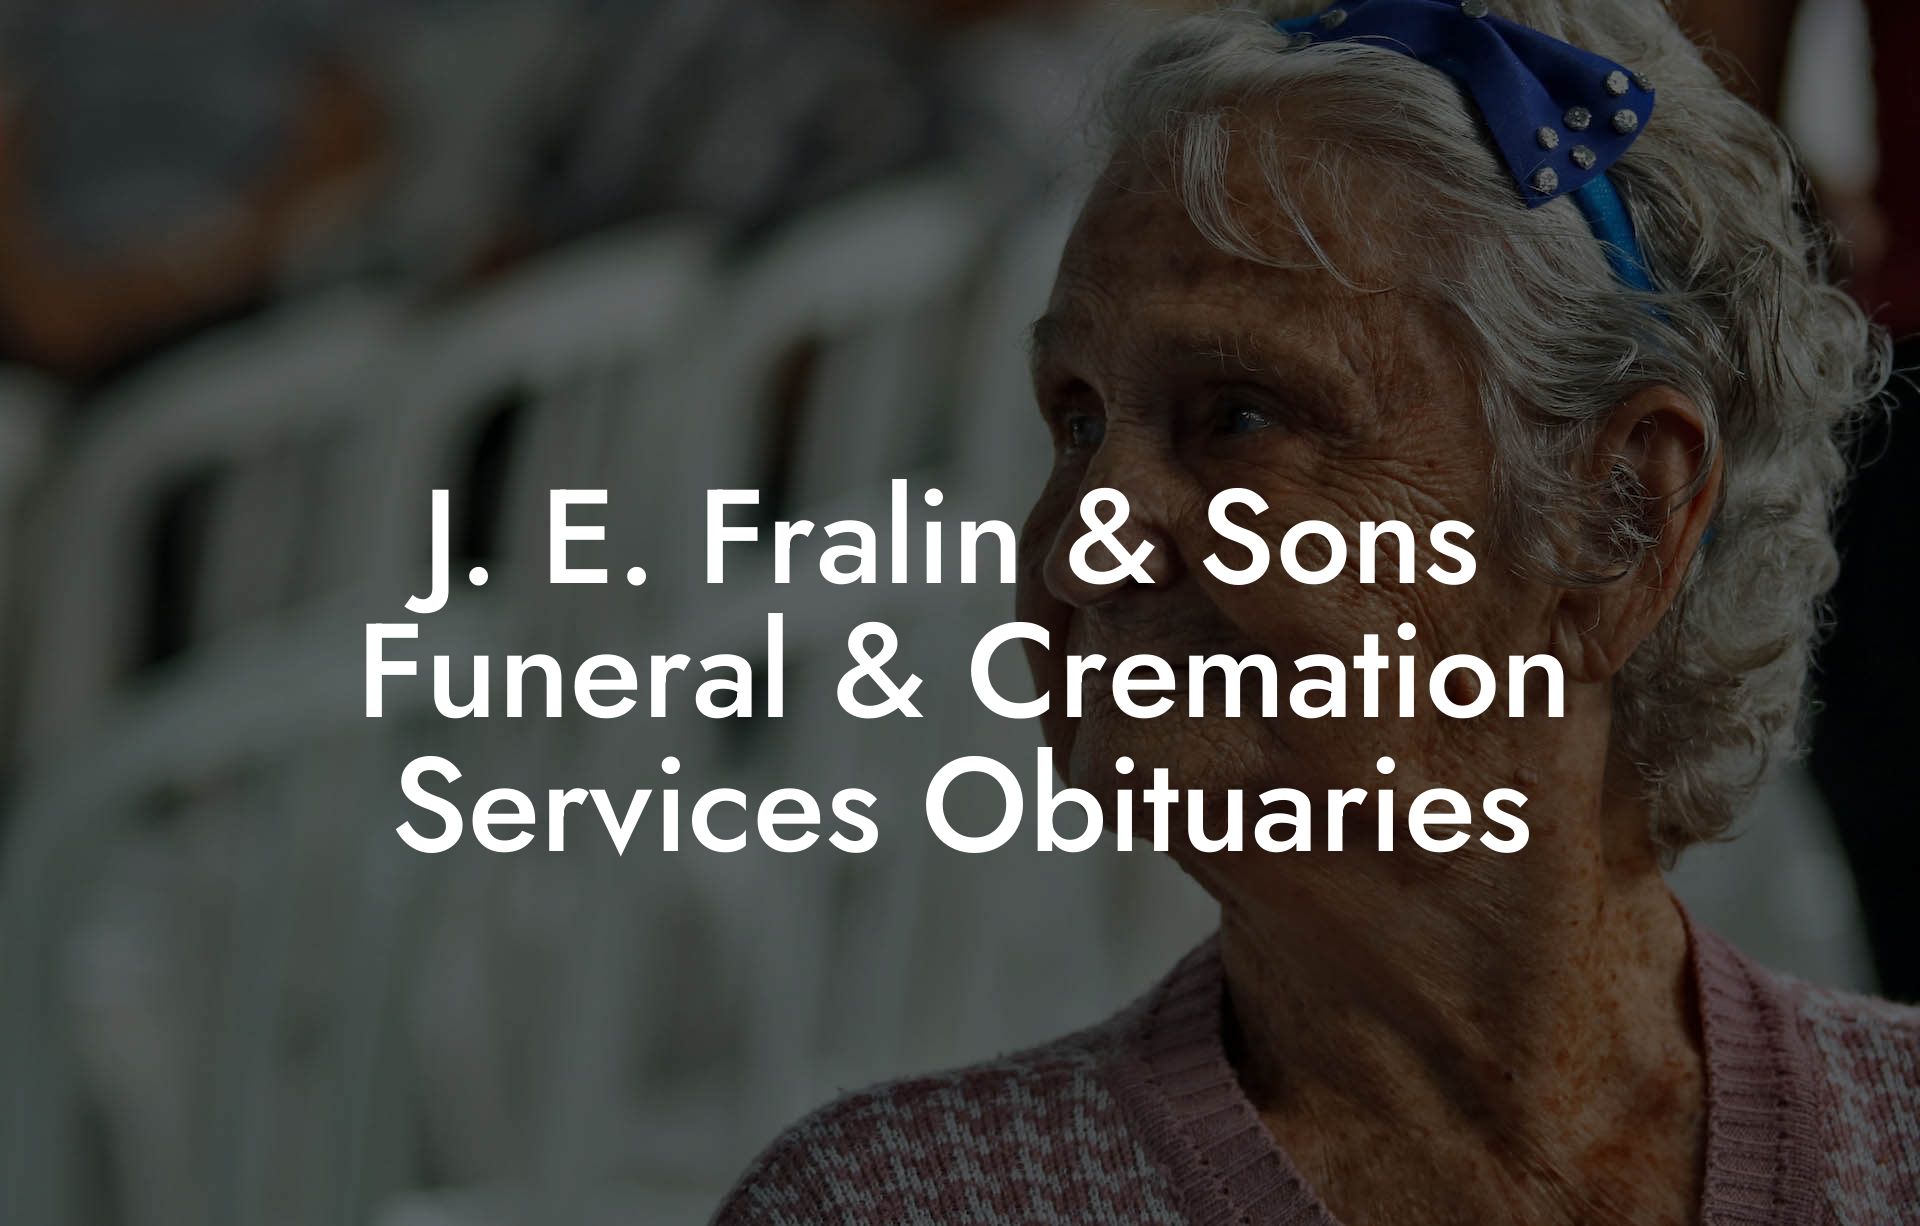 J. E. Fralin & Sons Funeral & Cremation Services Obituaries